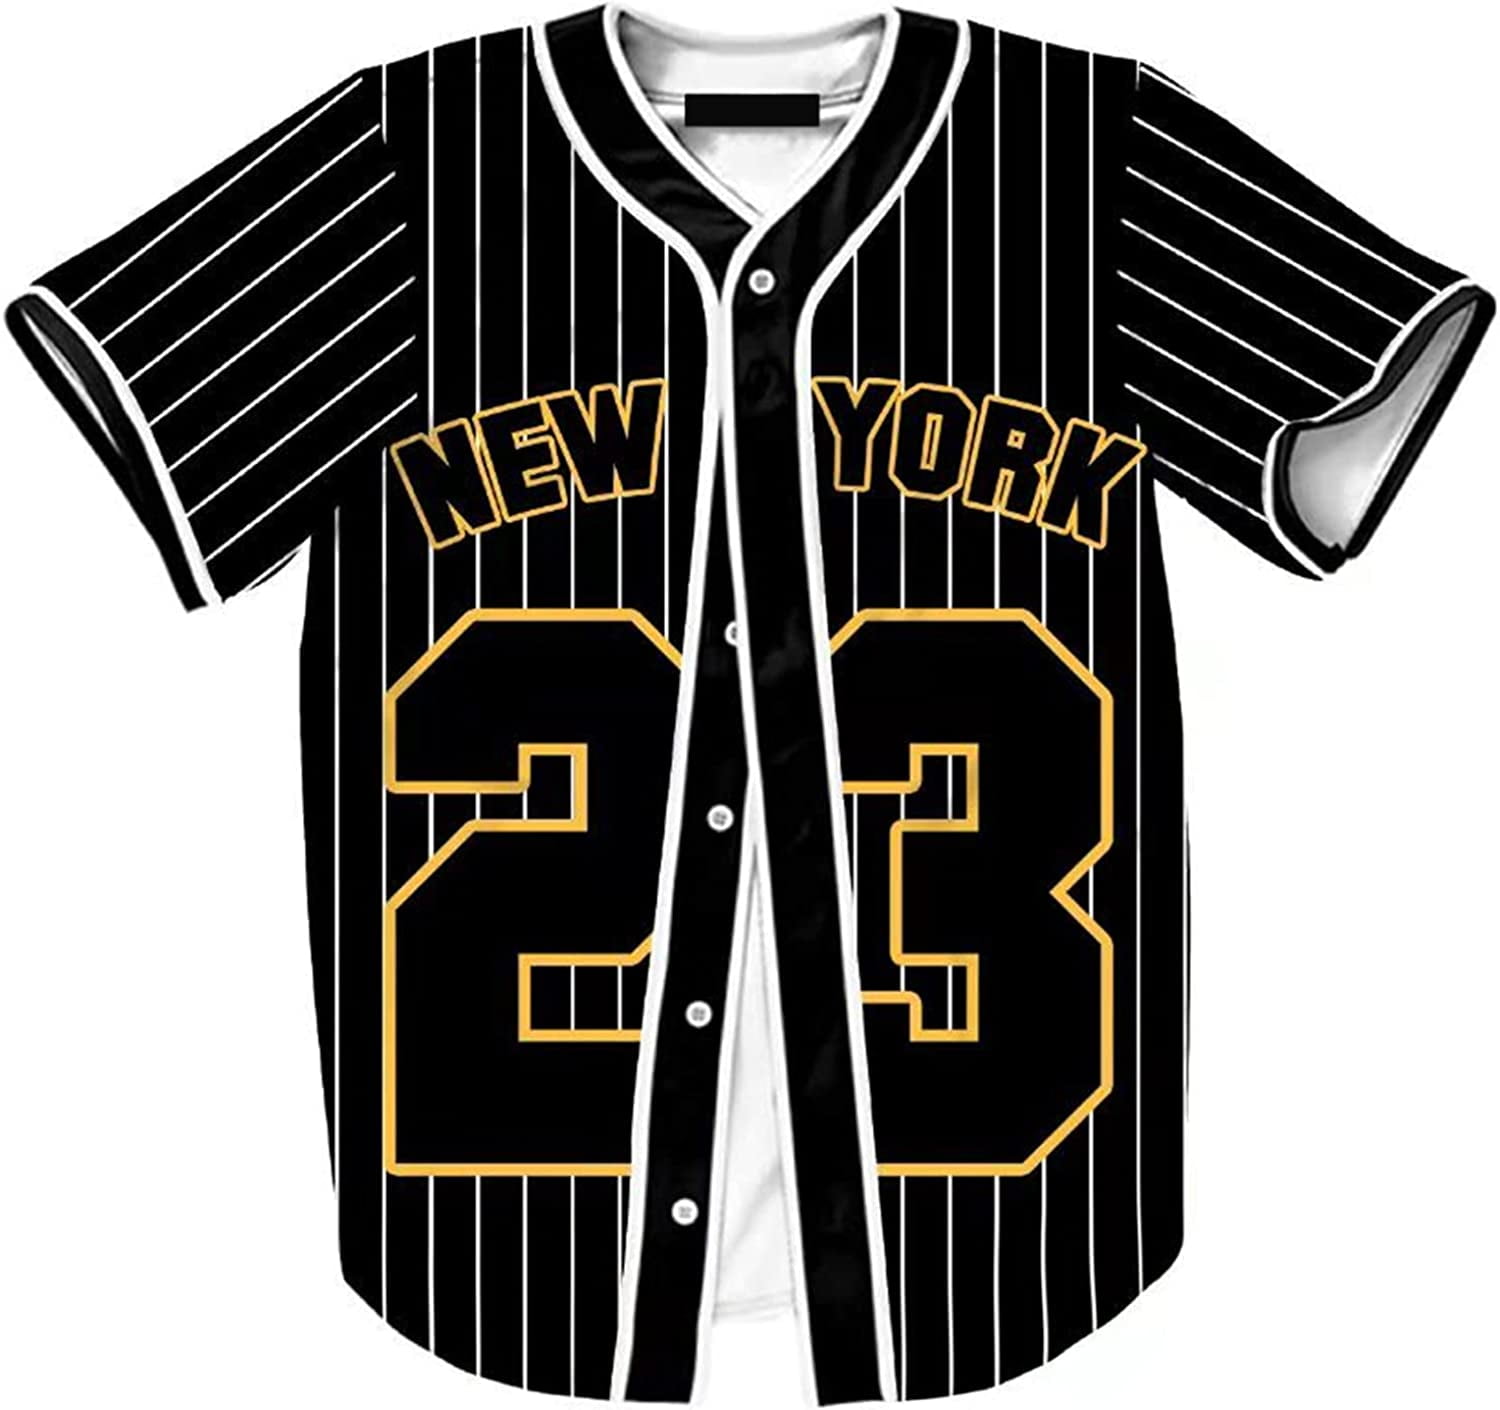 Baseball Jersey Classic New York 23 Stripes Design Printed for 80s 